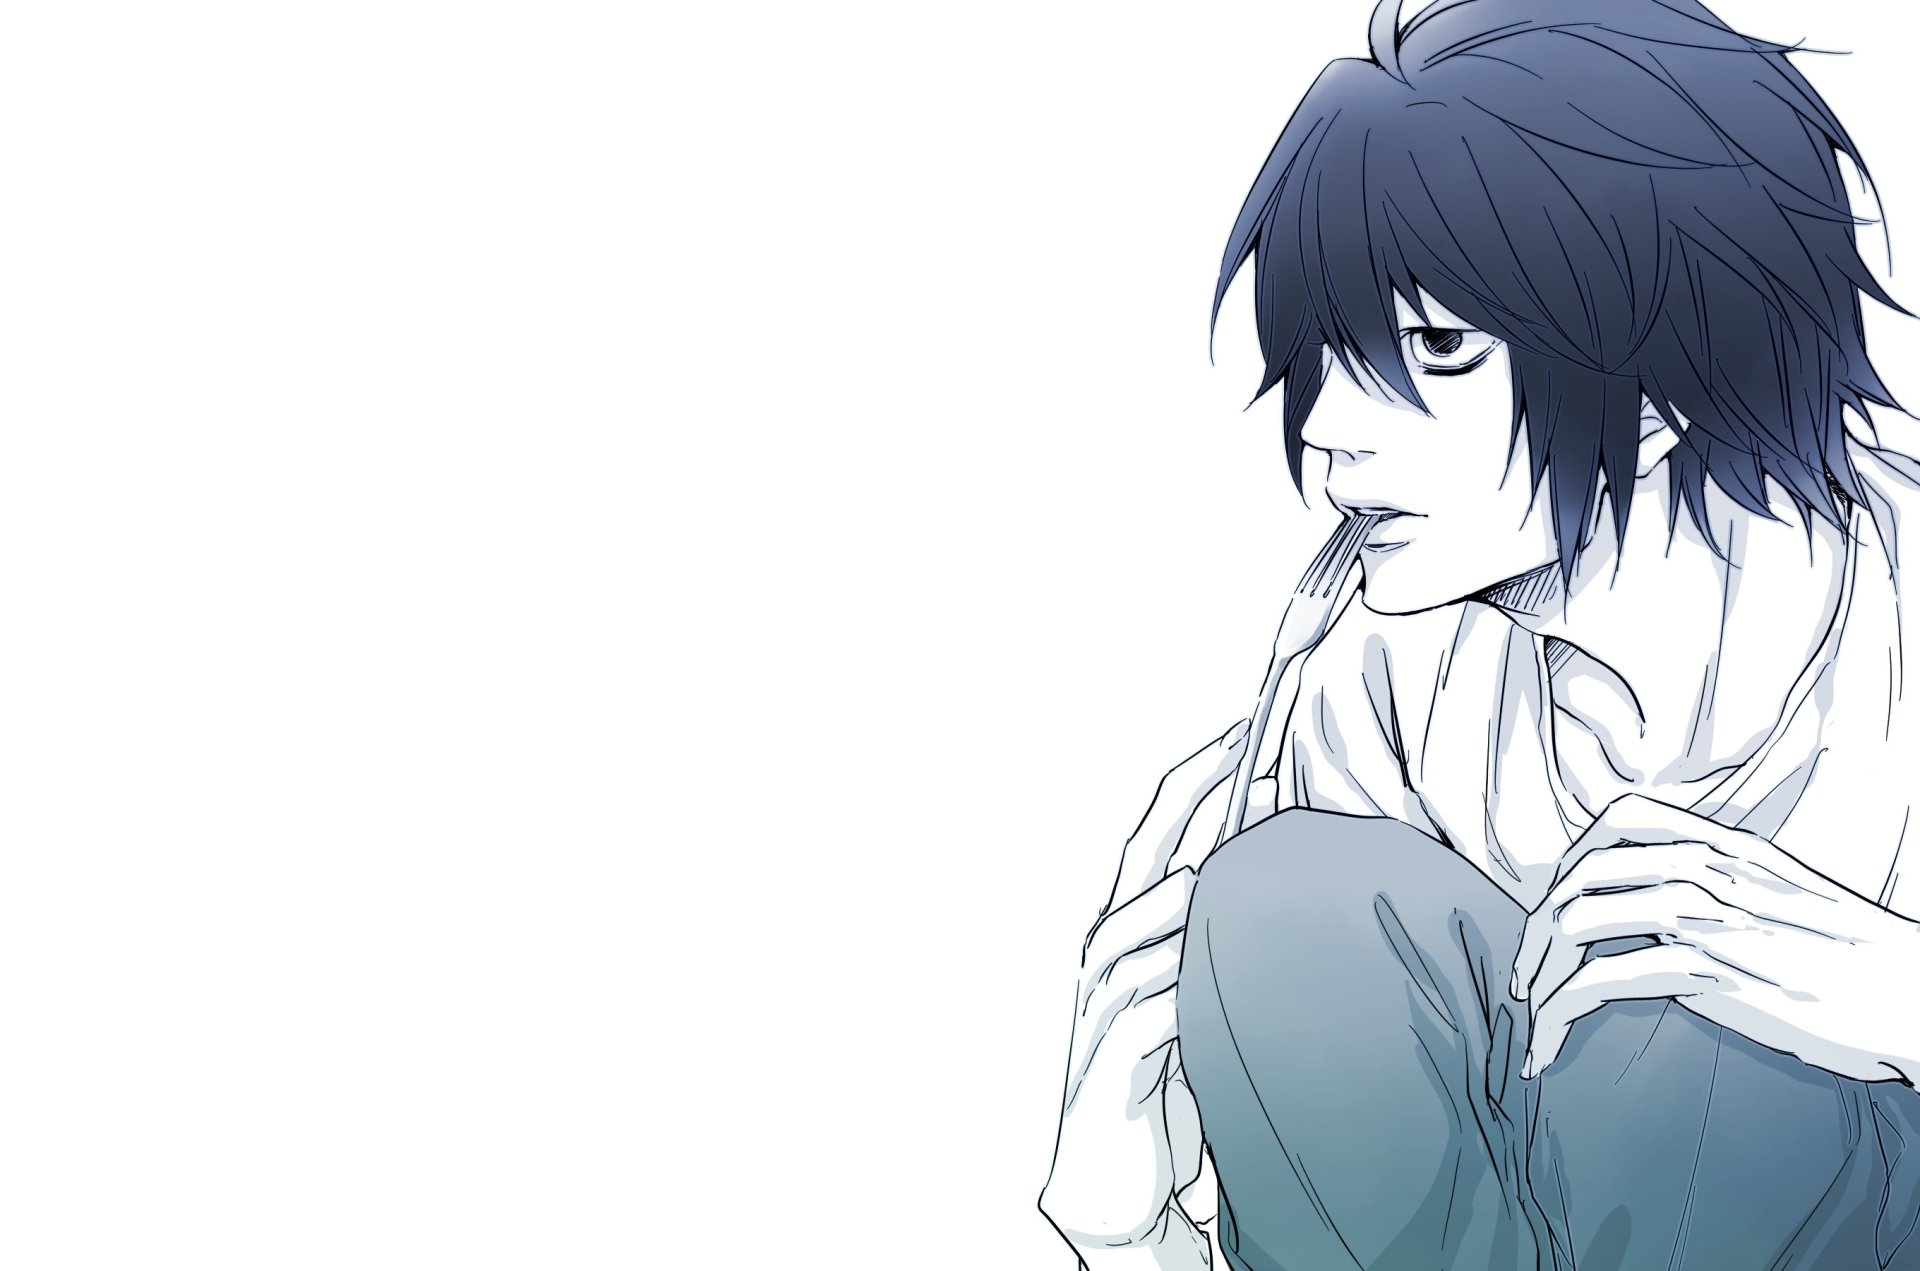 L from Death Note, a character from the popular anime series, portrayed in a high-quality desktop wallpaper.